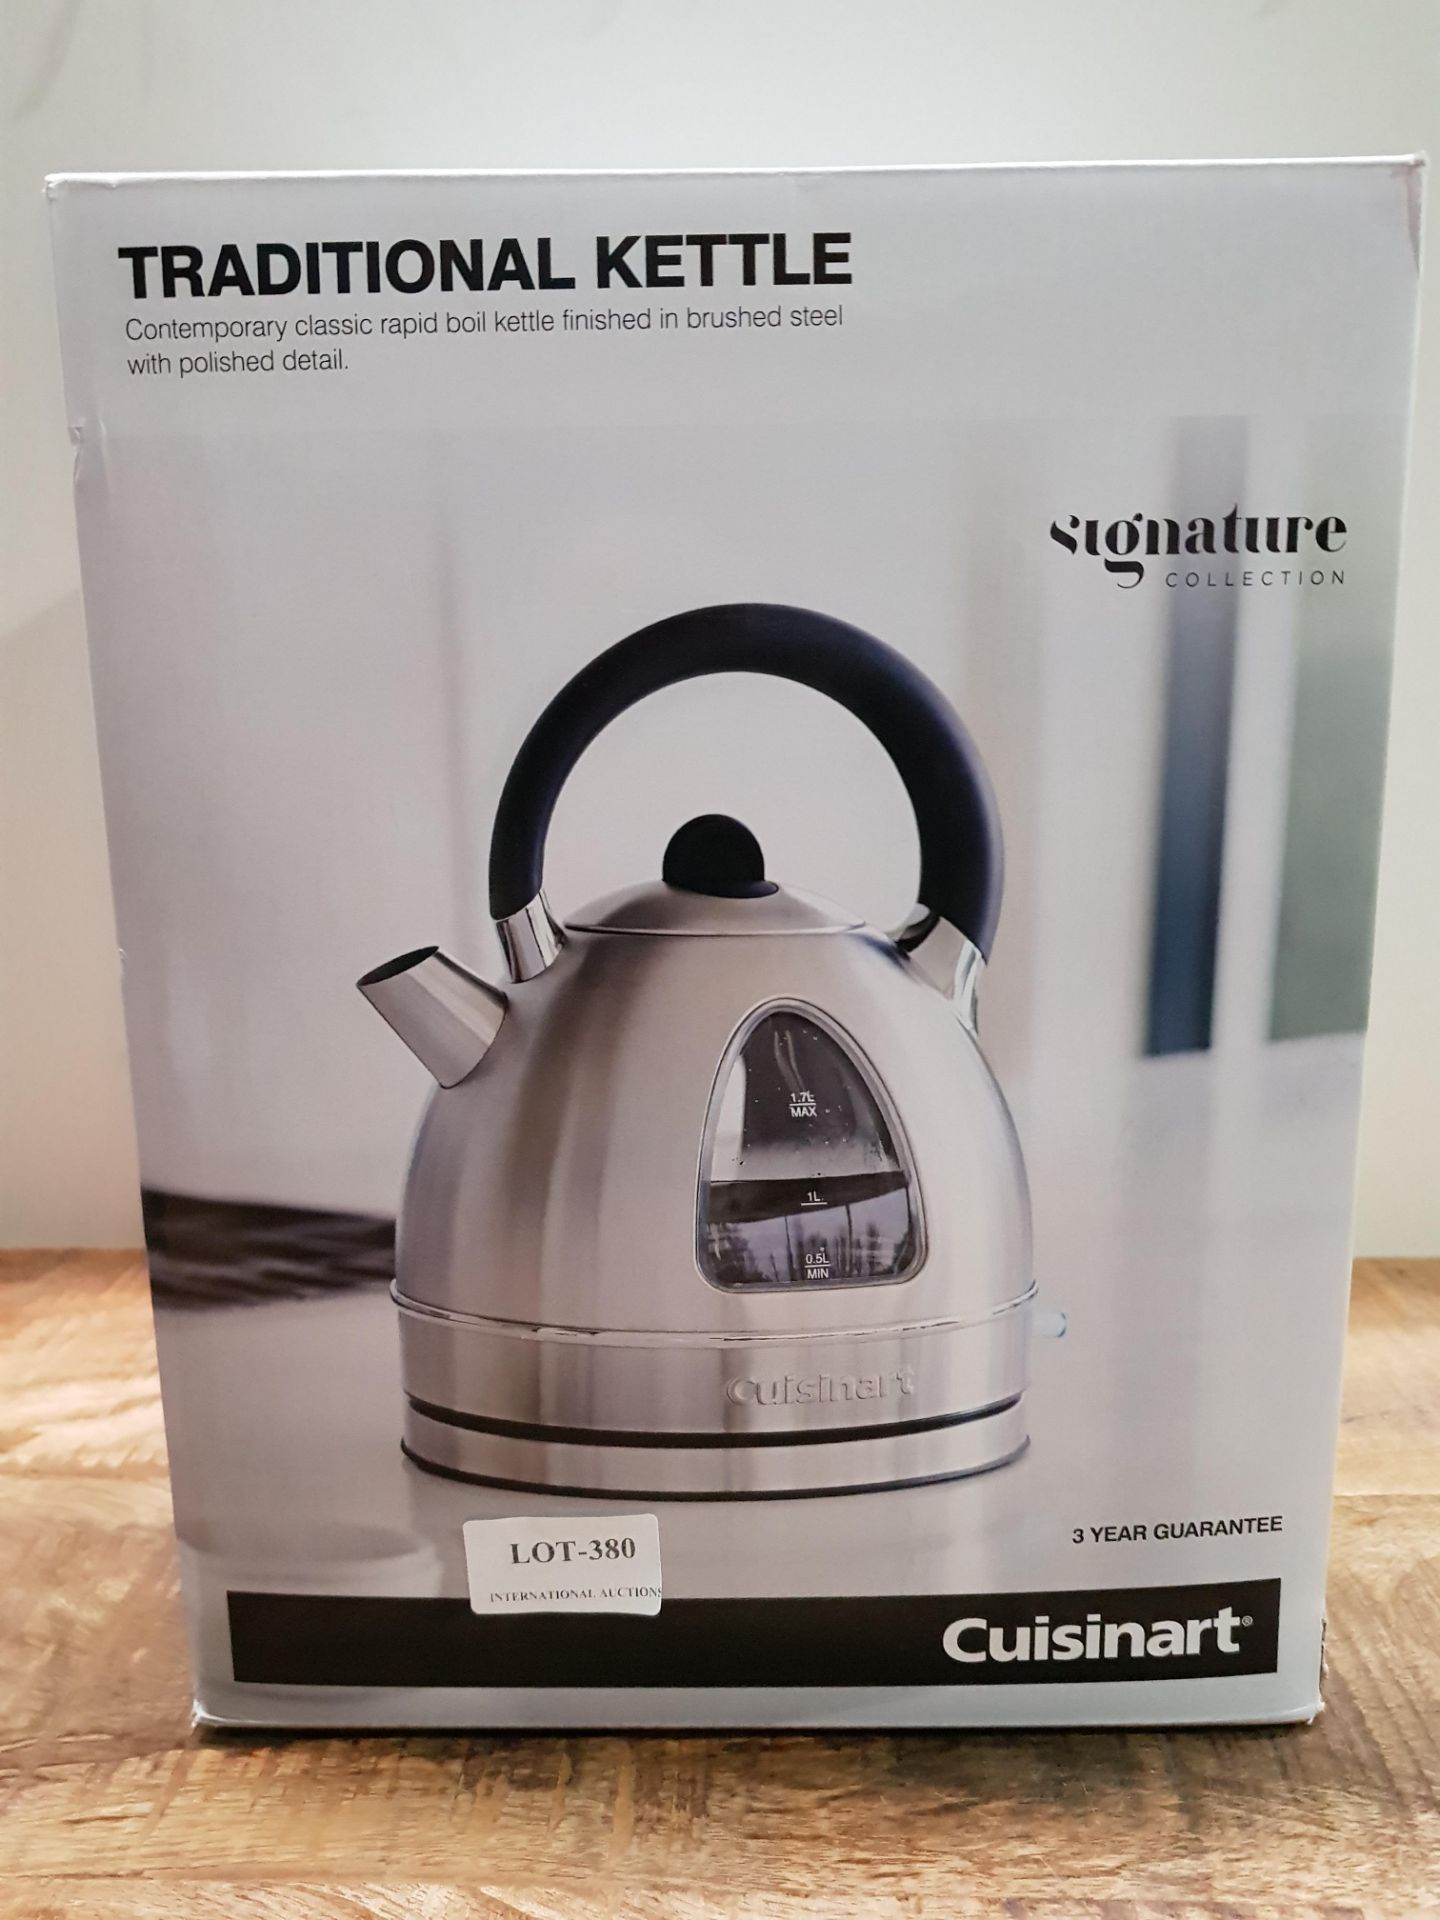 Cuisinart Traditional Kettle | 1.7L Capacity | Stainless Steel | CTK17U Â£58.50Condition